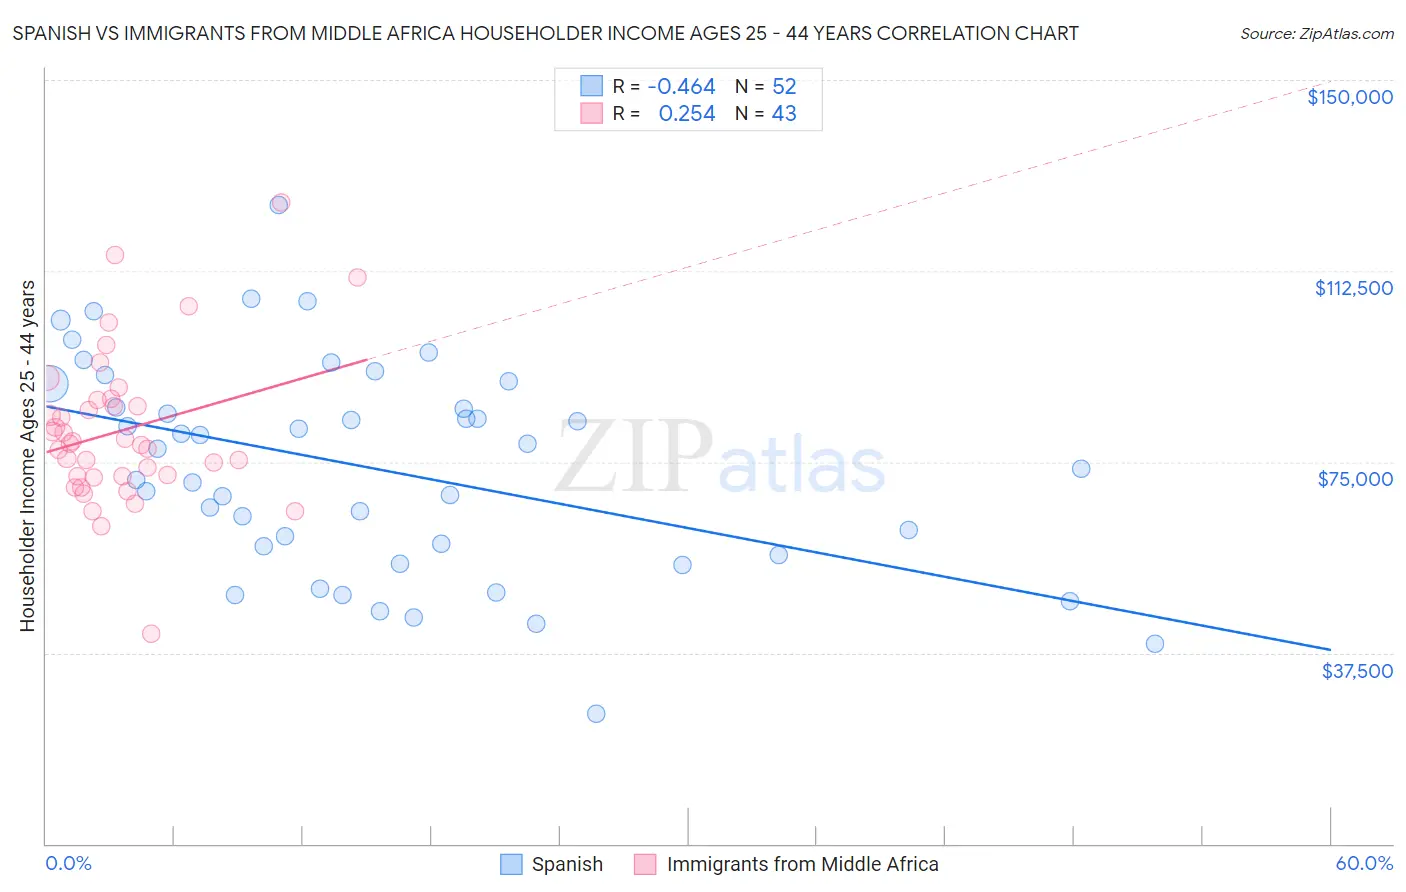 Spanish vs Immigrants from Middle Africa Householder Income Ages 25 - 44 years